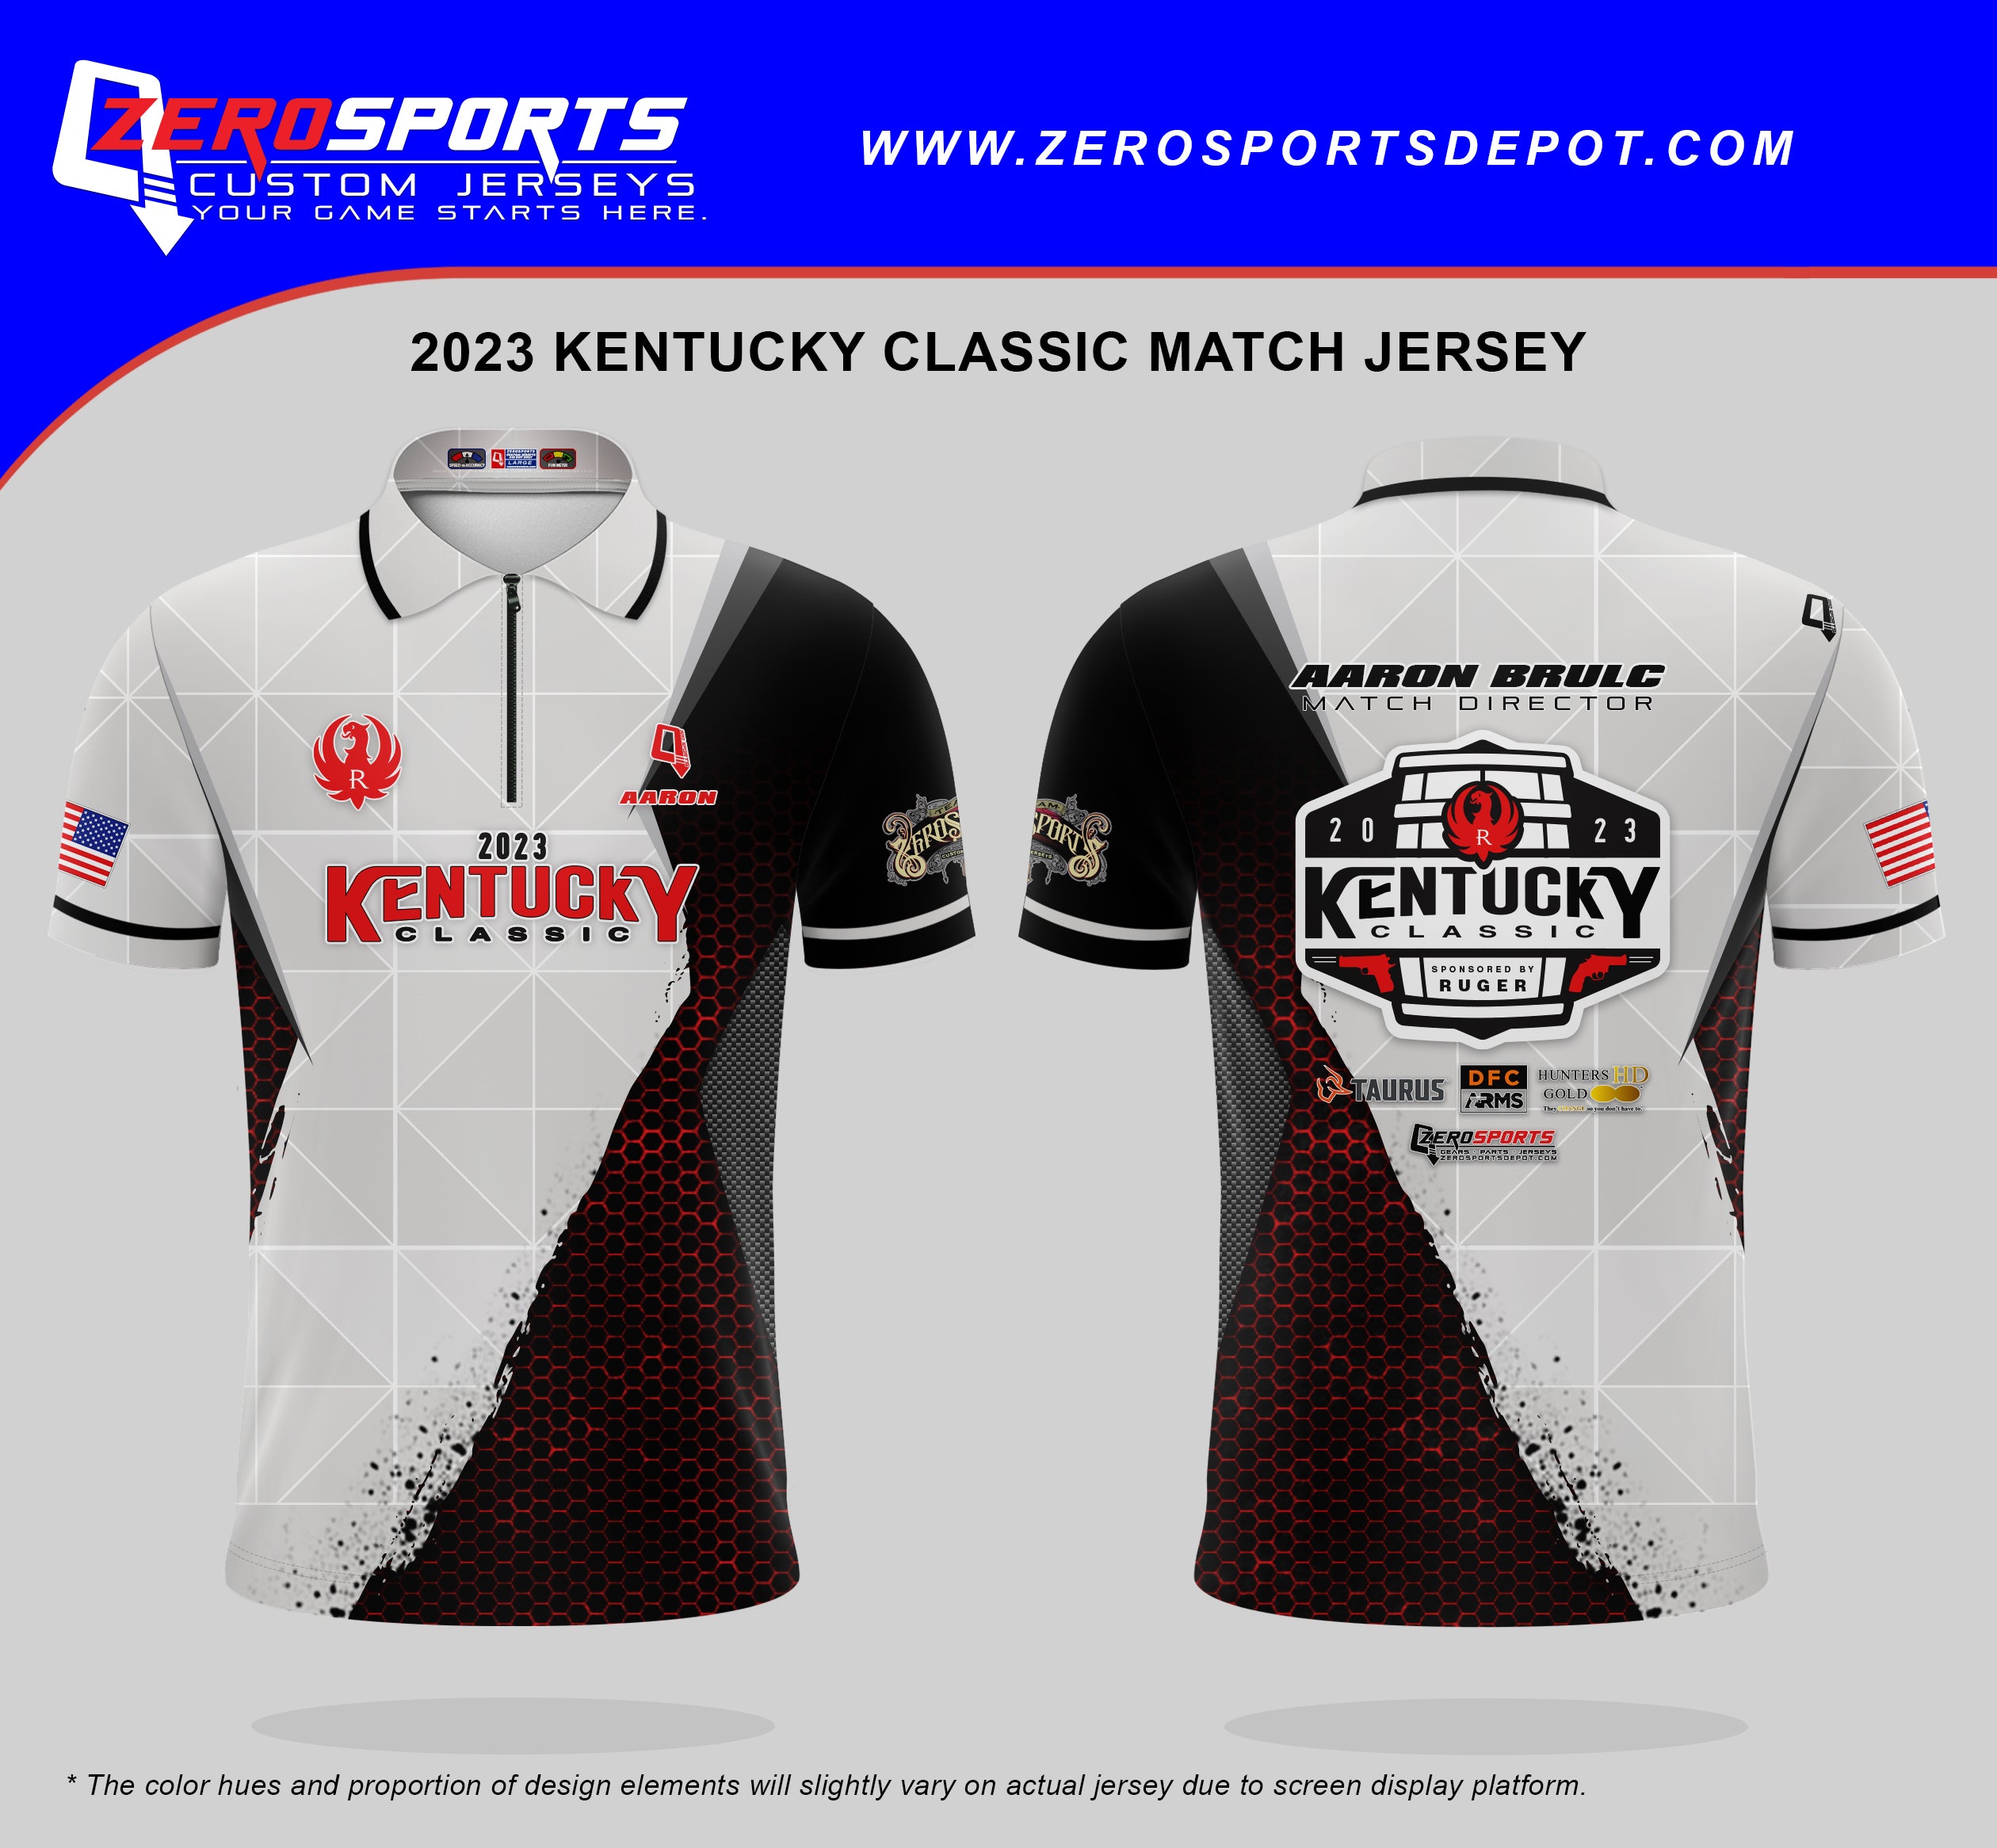 2023 Kentucky Classic Match Jersey  **All orders after 7/31/2023 will be shipped directly to your address after the match.